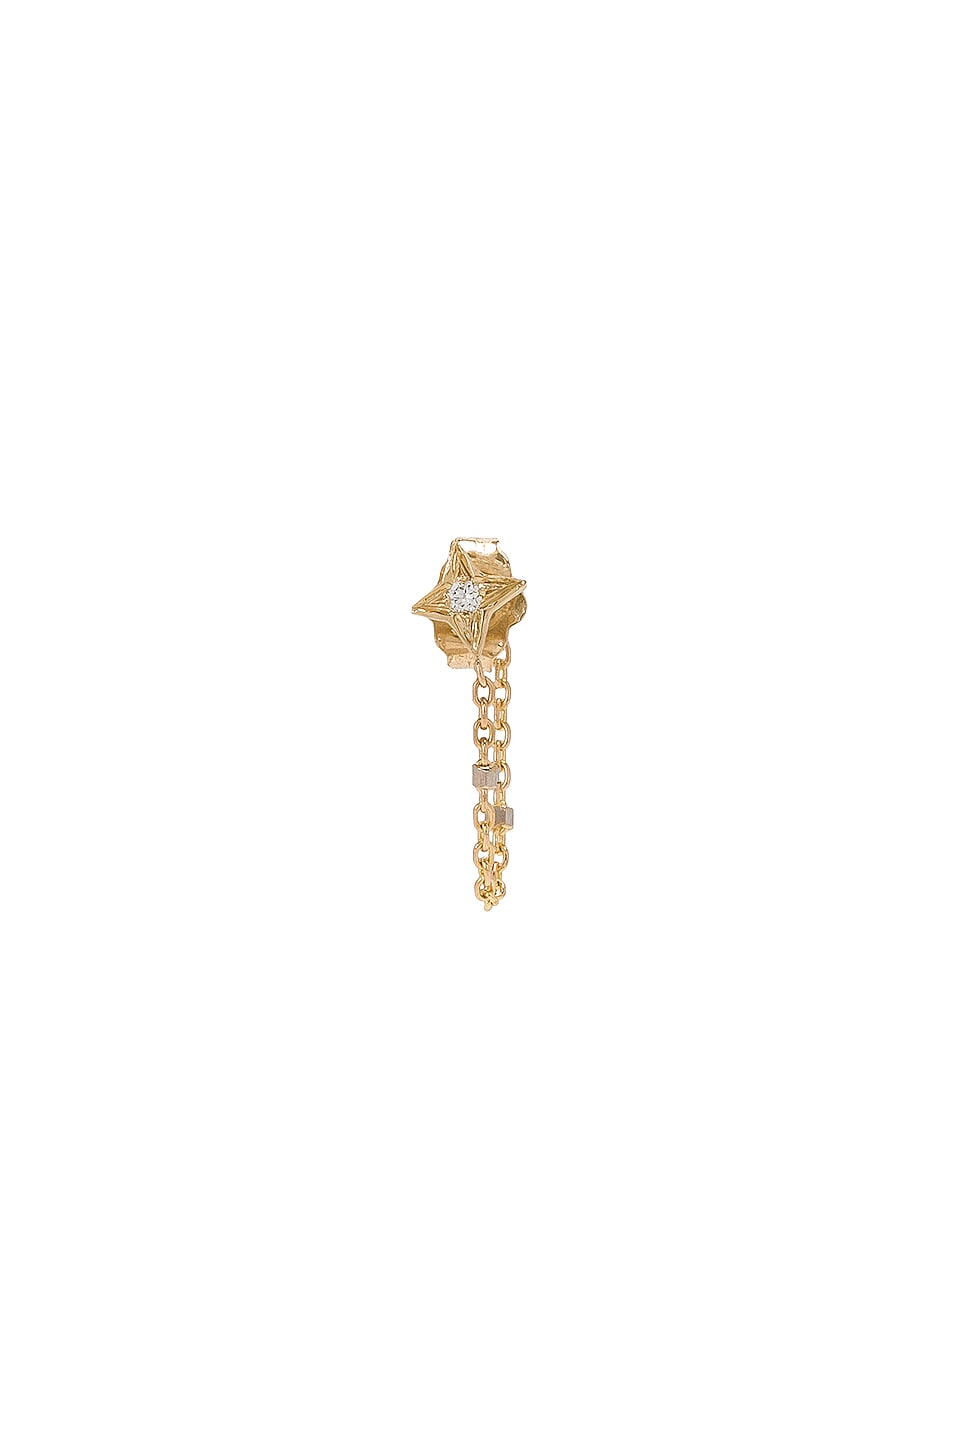 Image 1 of Logan Hollowell Four Point Star Chain Single Earring in 14k Gold